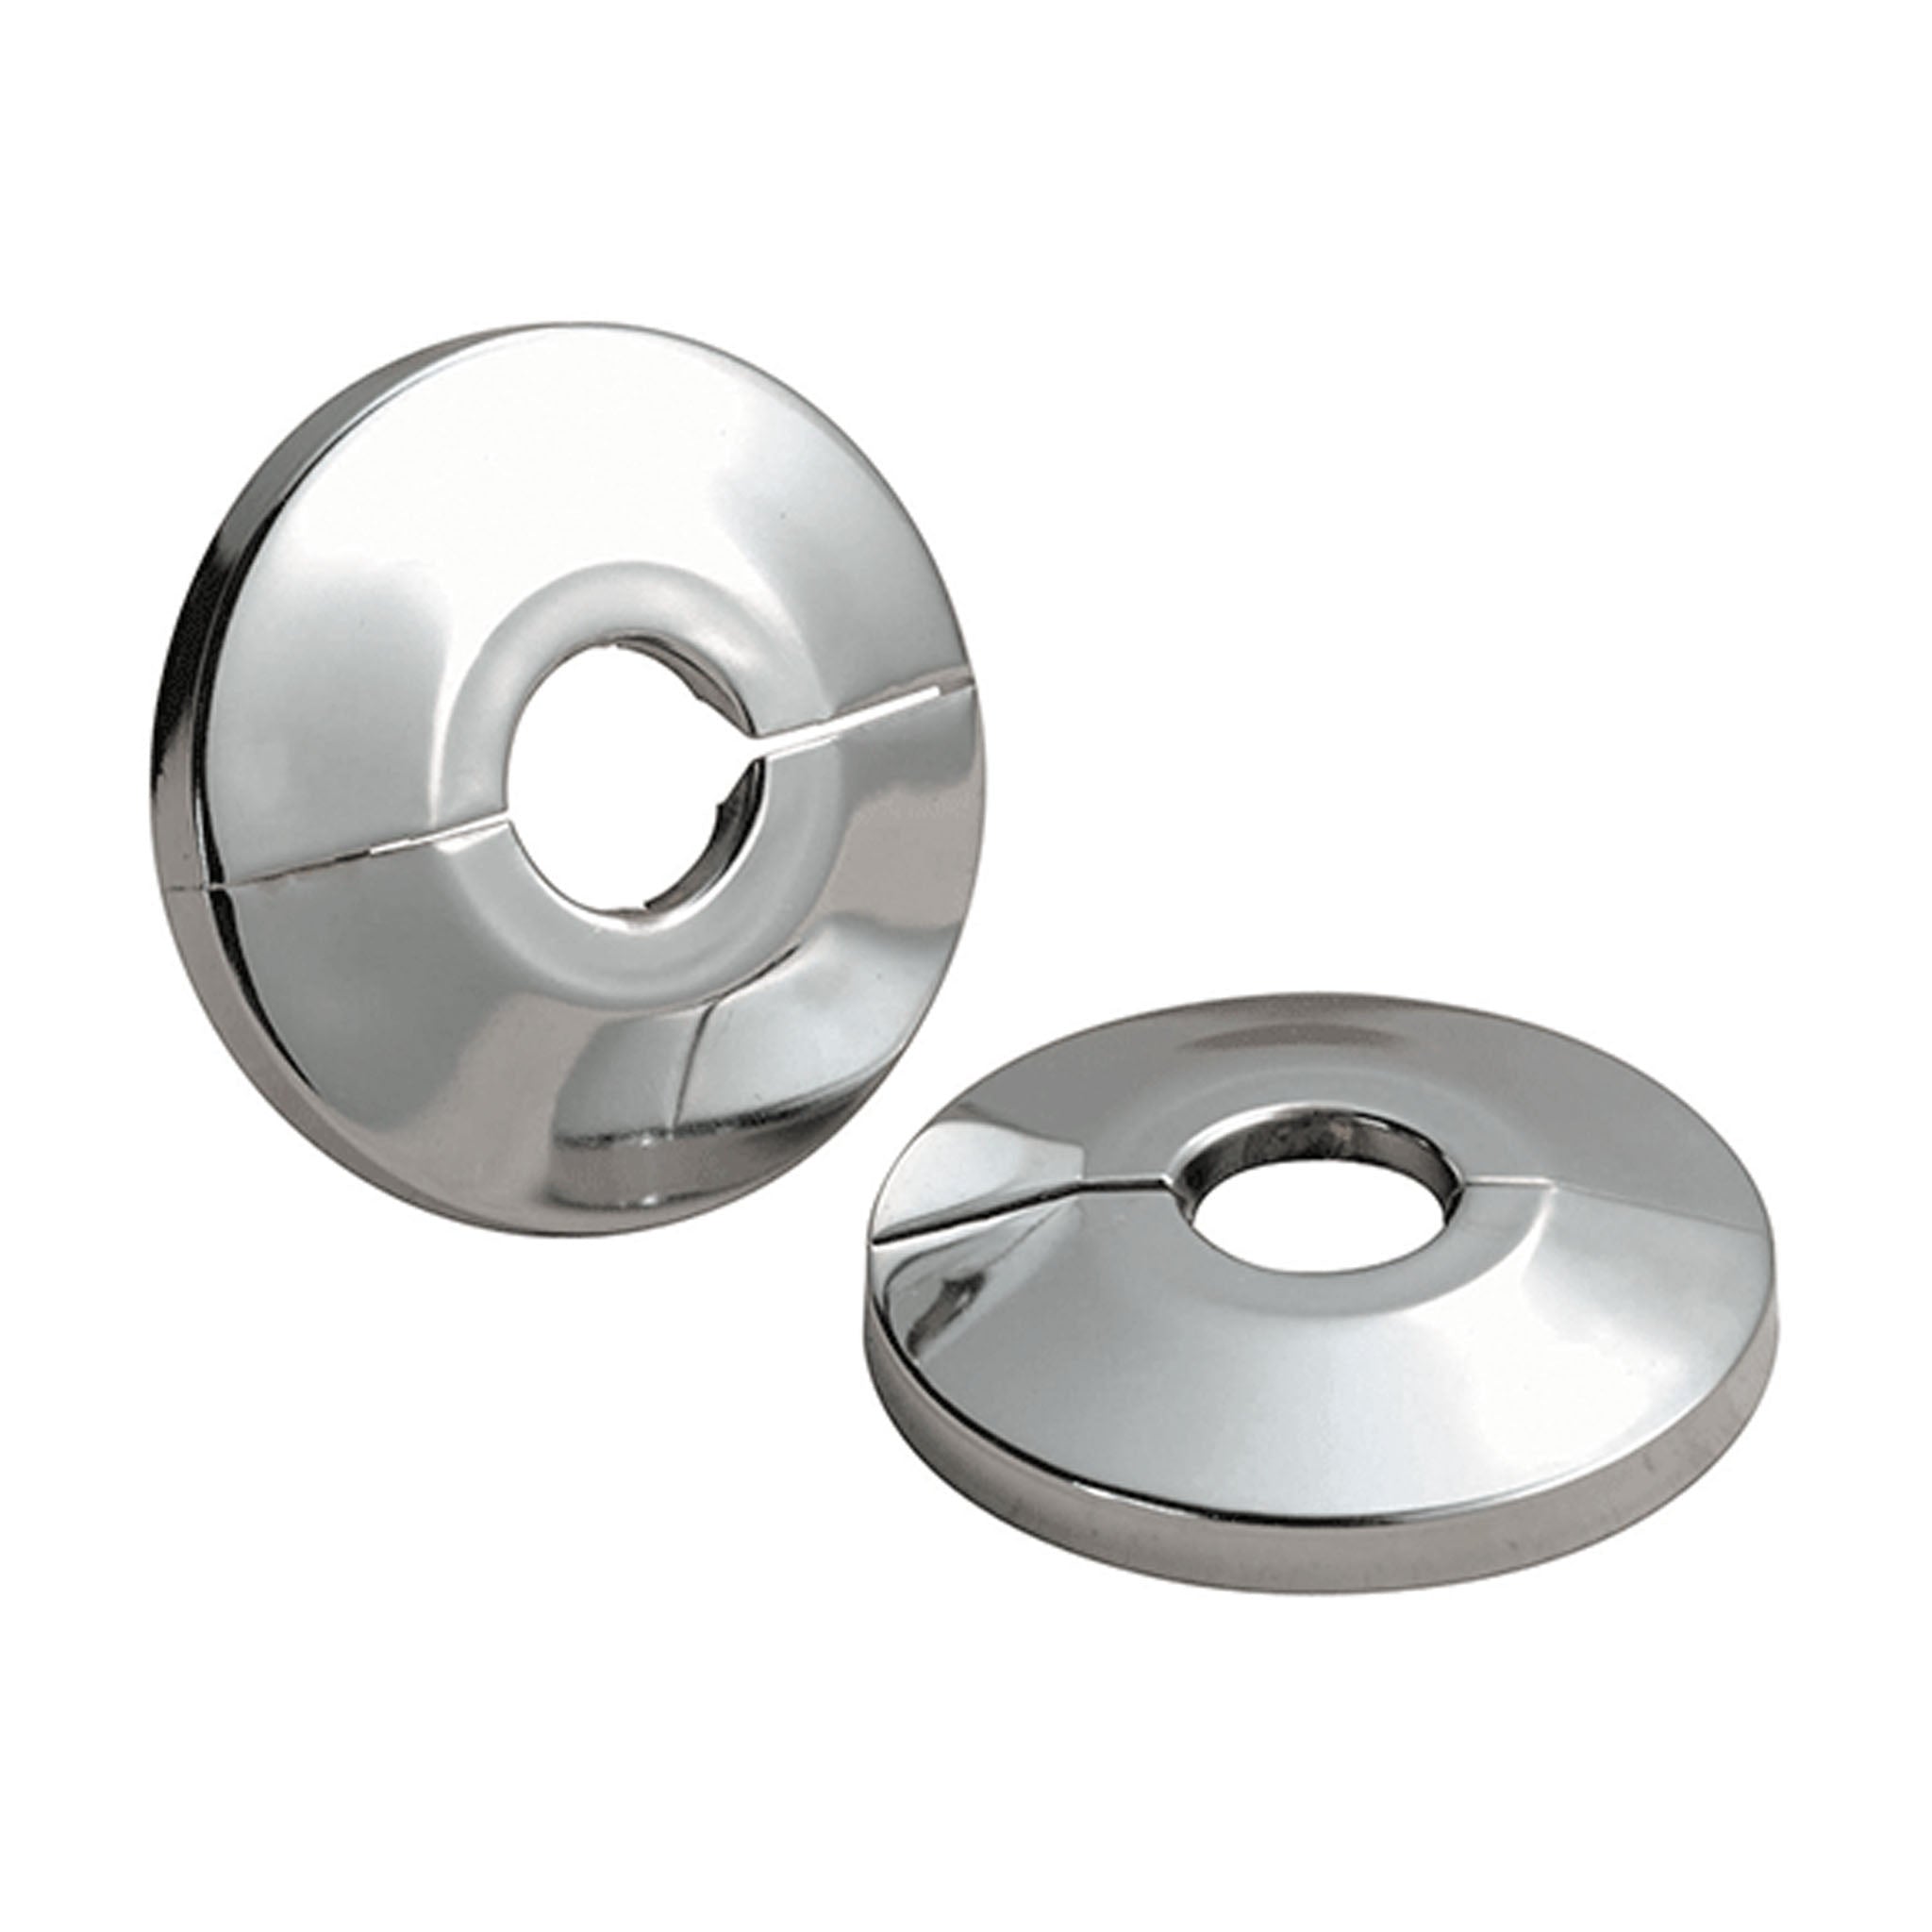 Vogue Round Hinged Cover Plates (Pair)